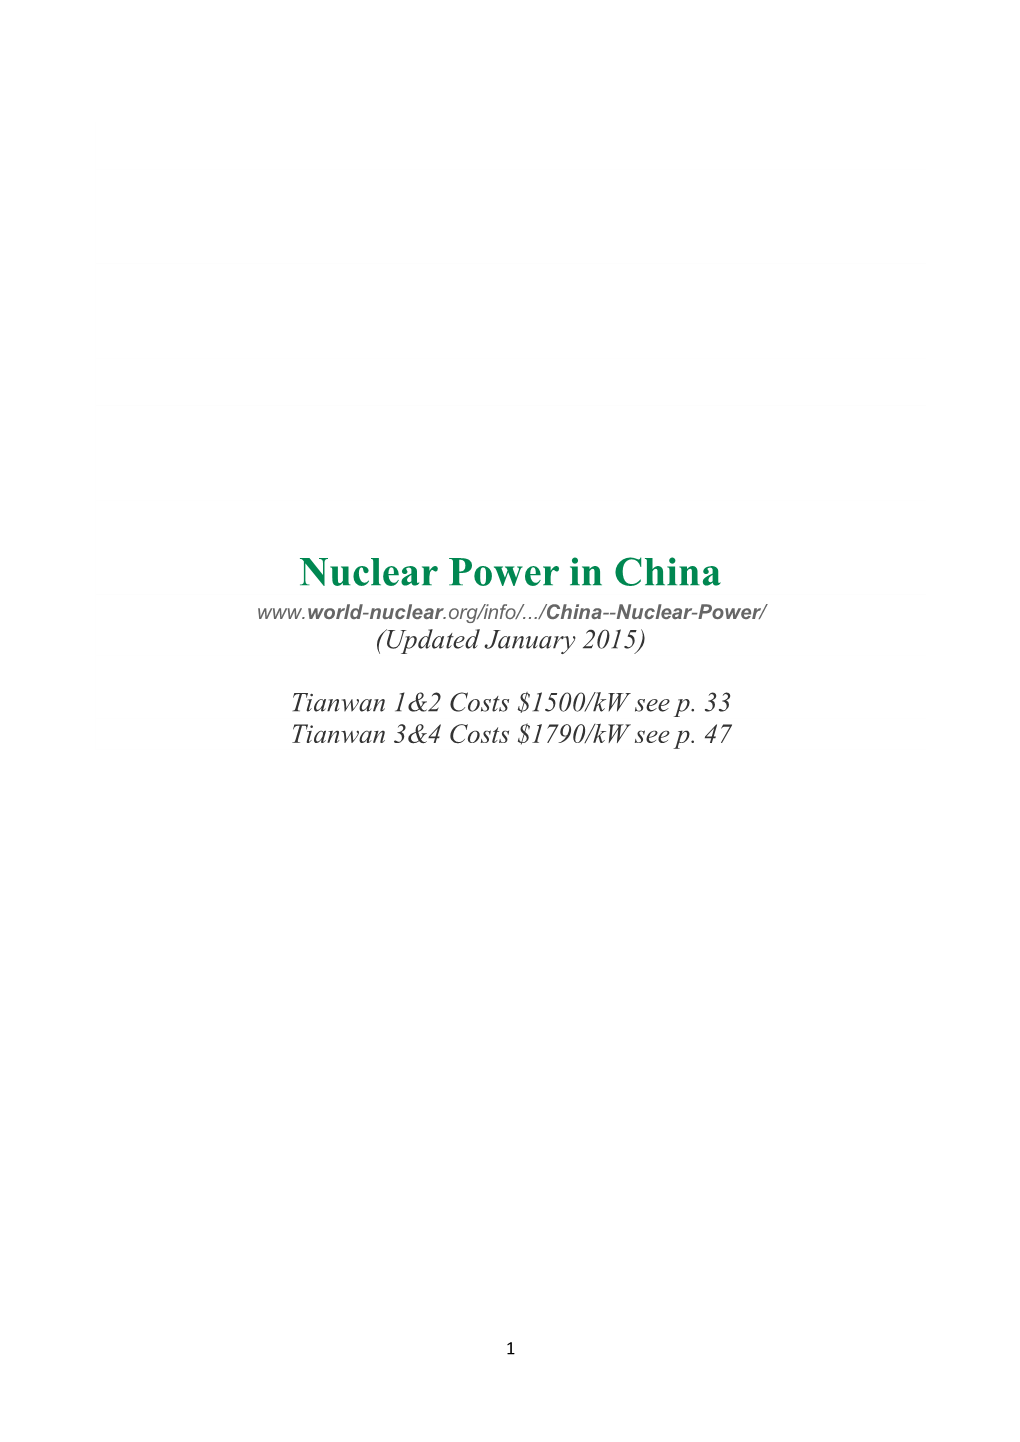 Nuclear Power in China (Updated January 2015)